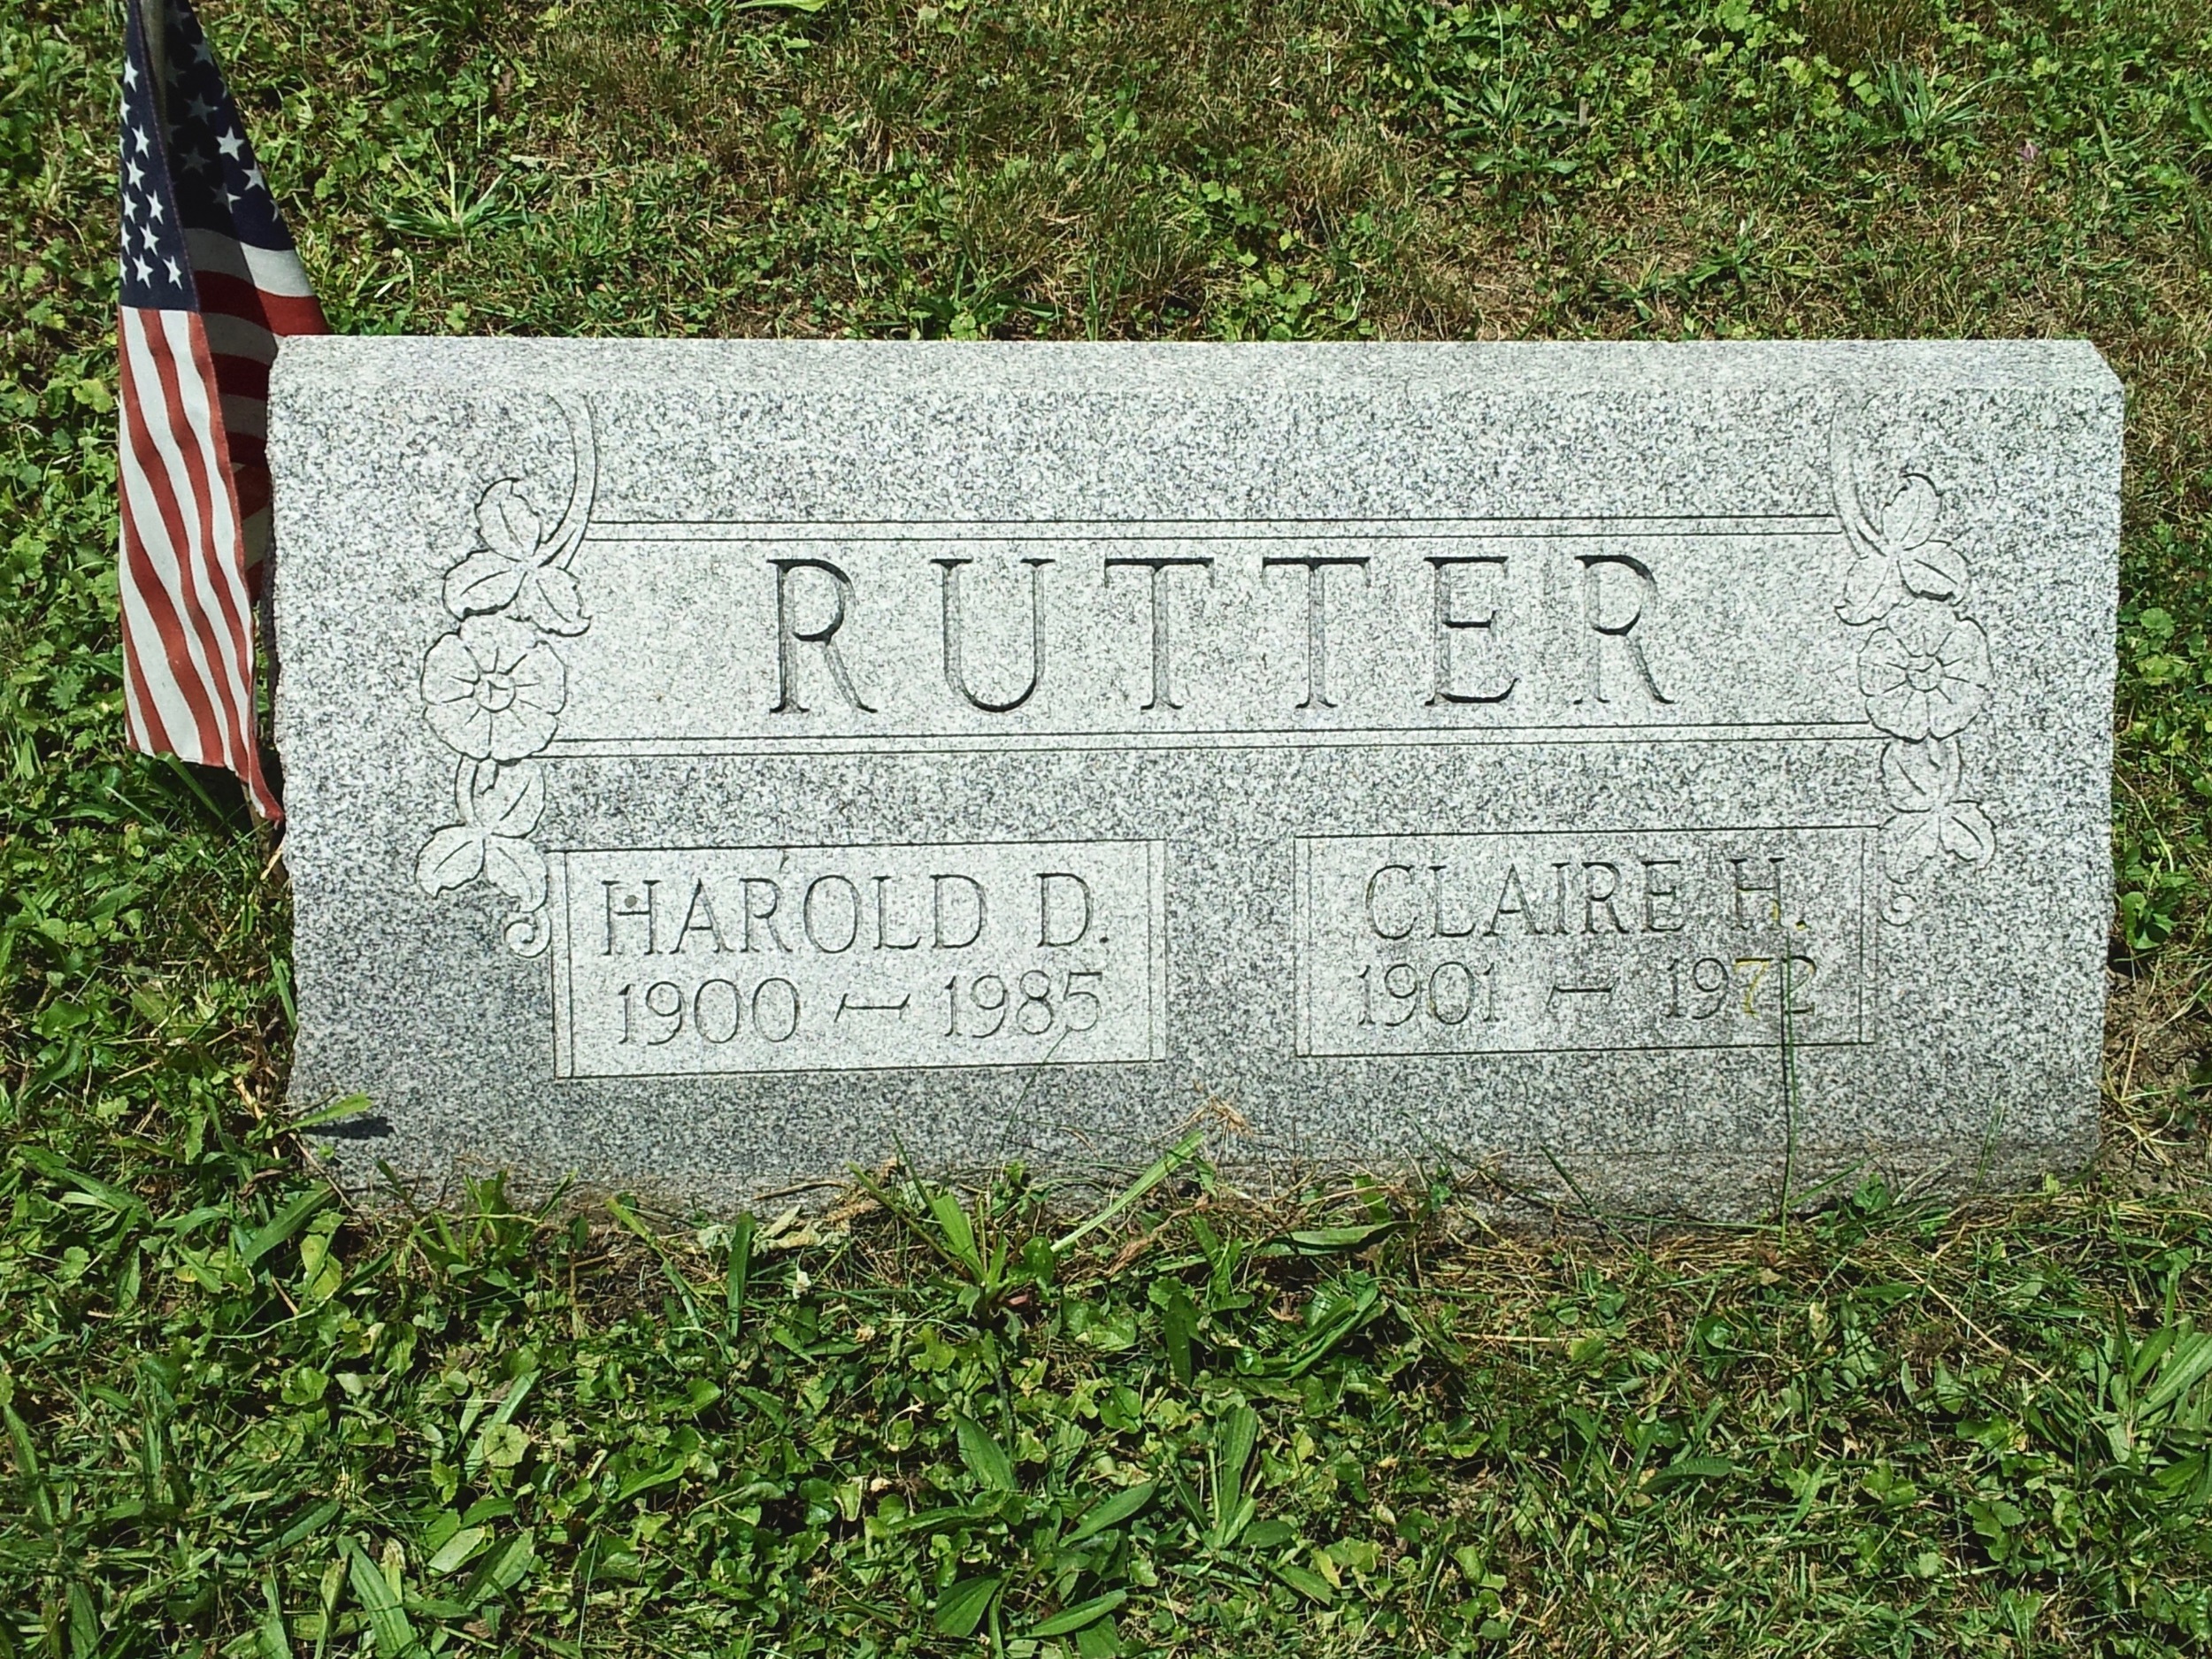  Headstone of my paternal grandparents. Photo credit goes to my cousin Michelle. Thank you! 